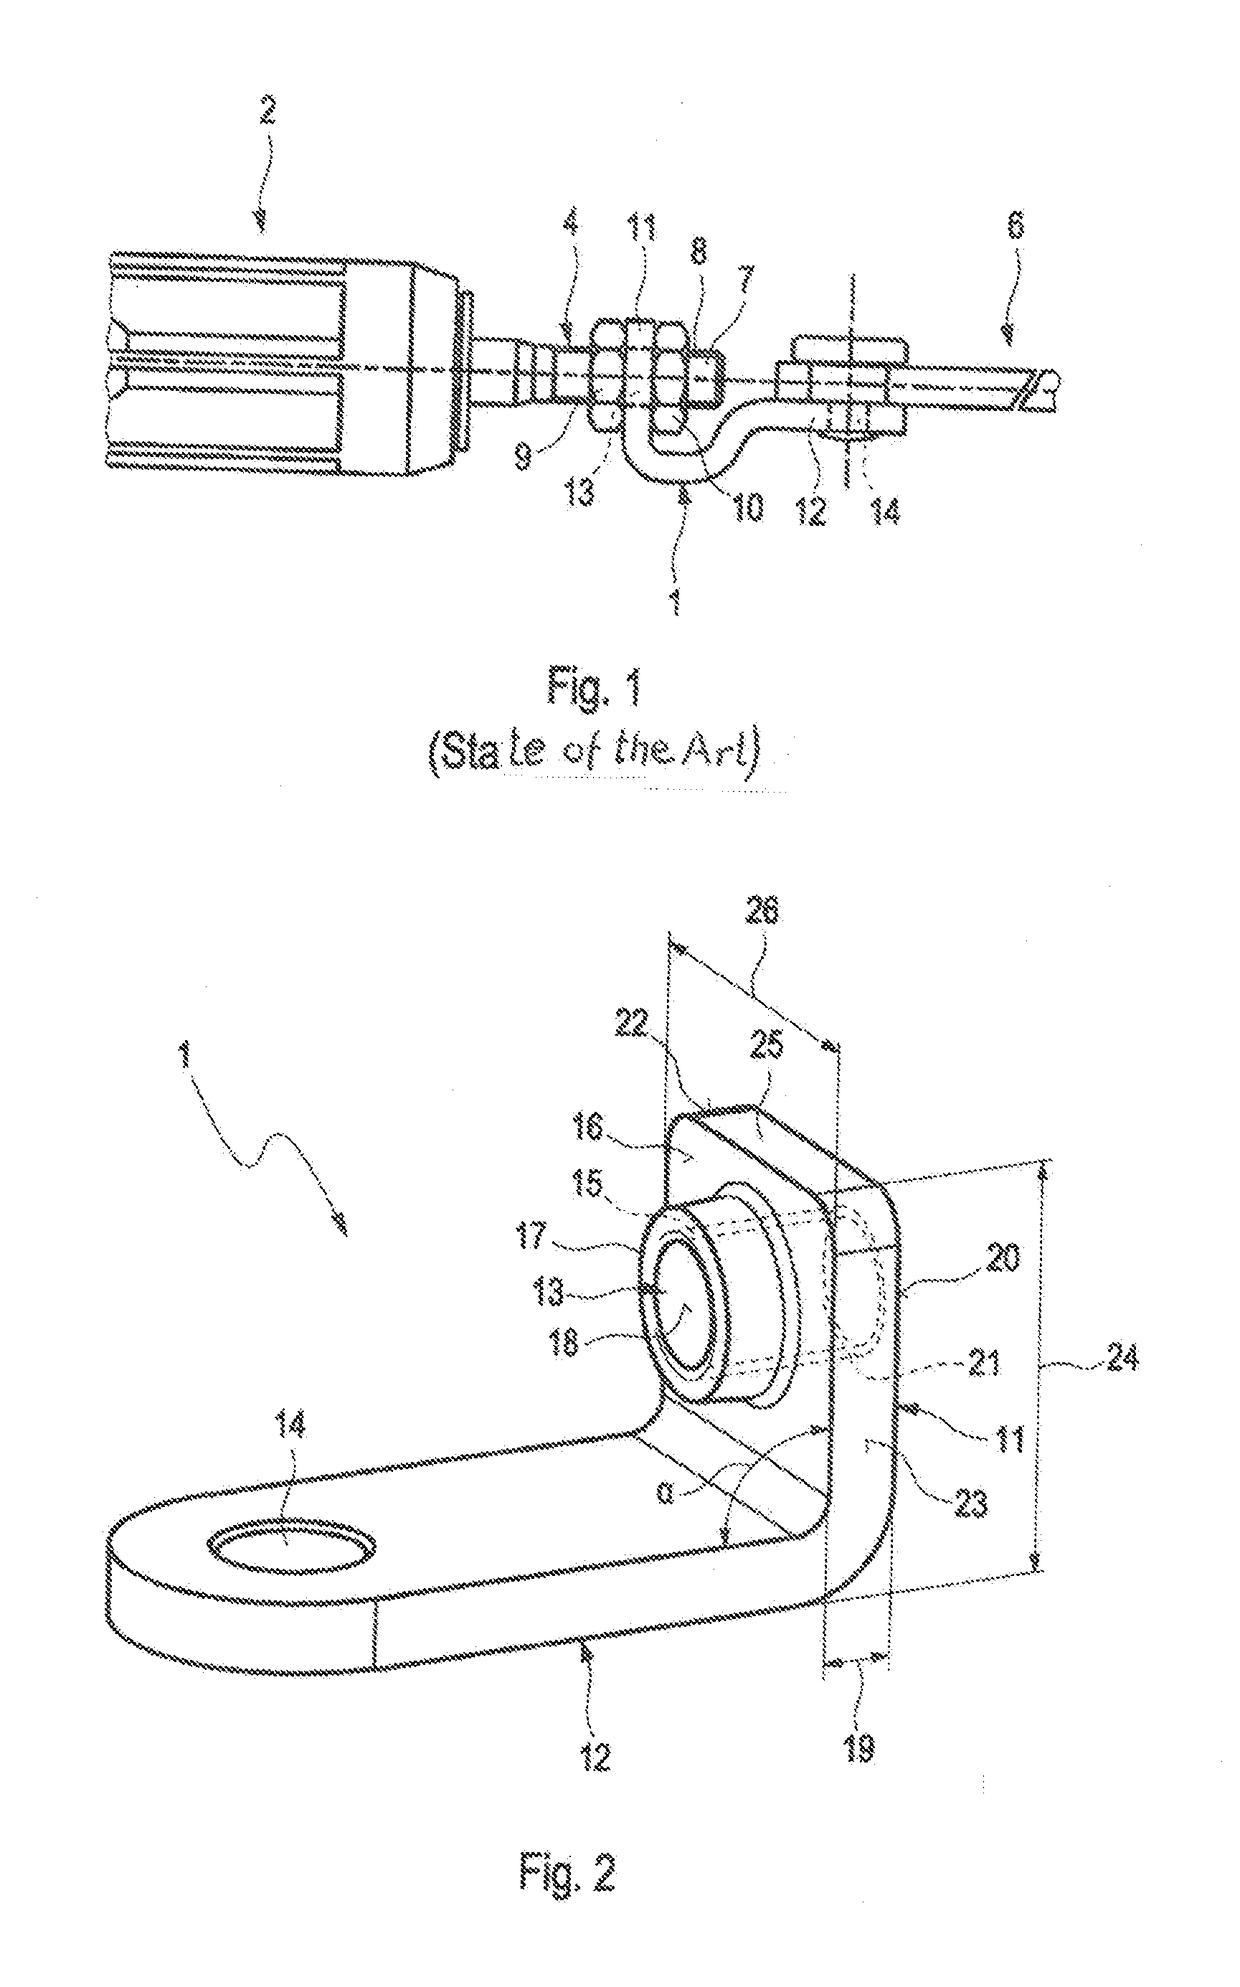 Retaining element for a control device of an exhaust gas turbocharger